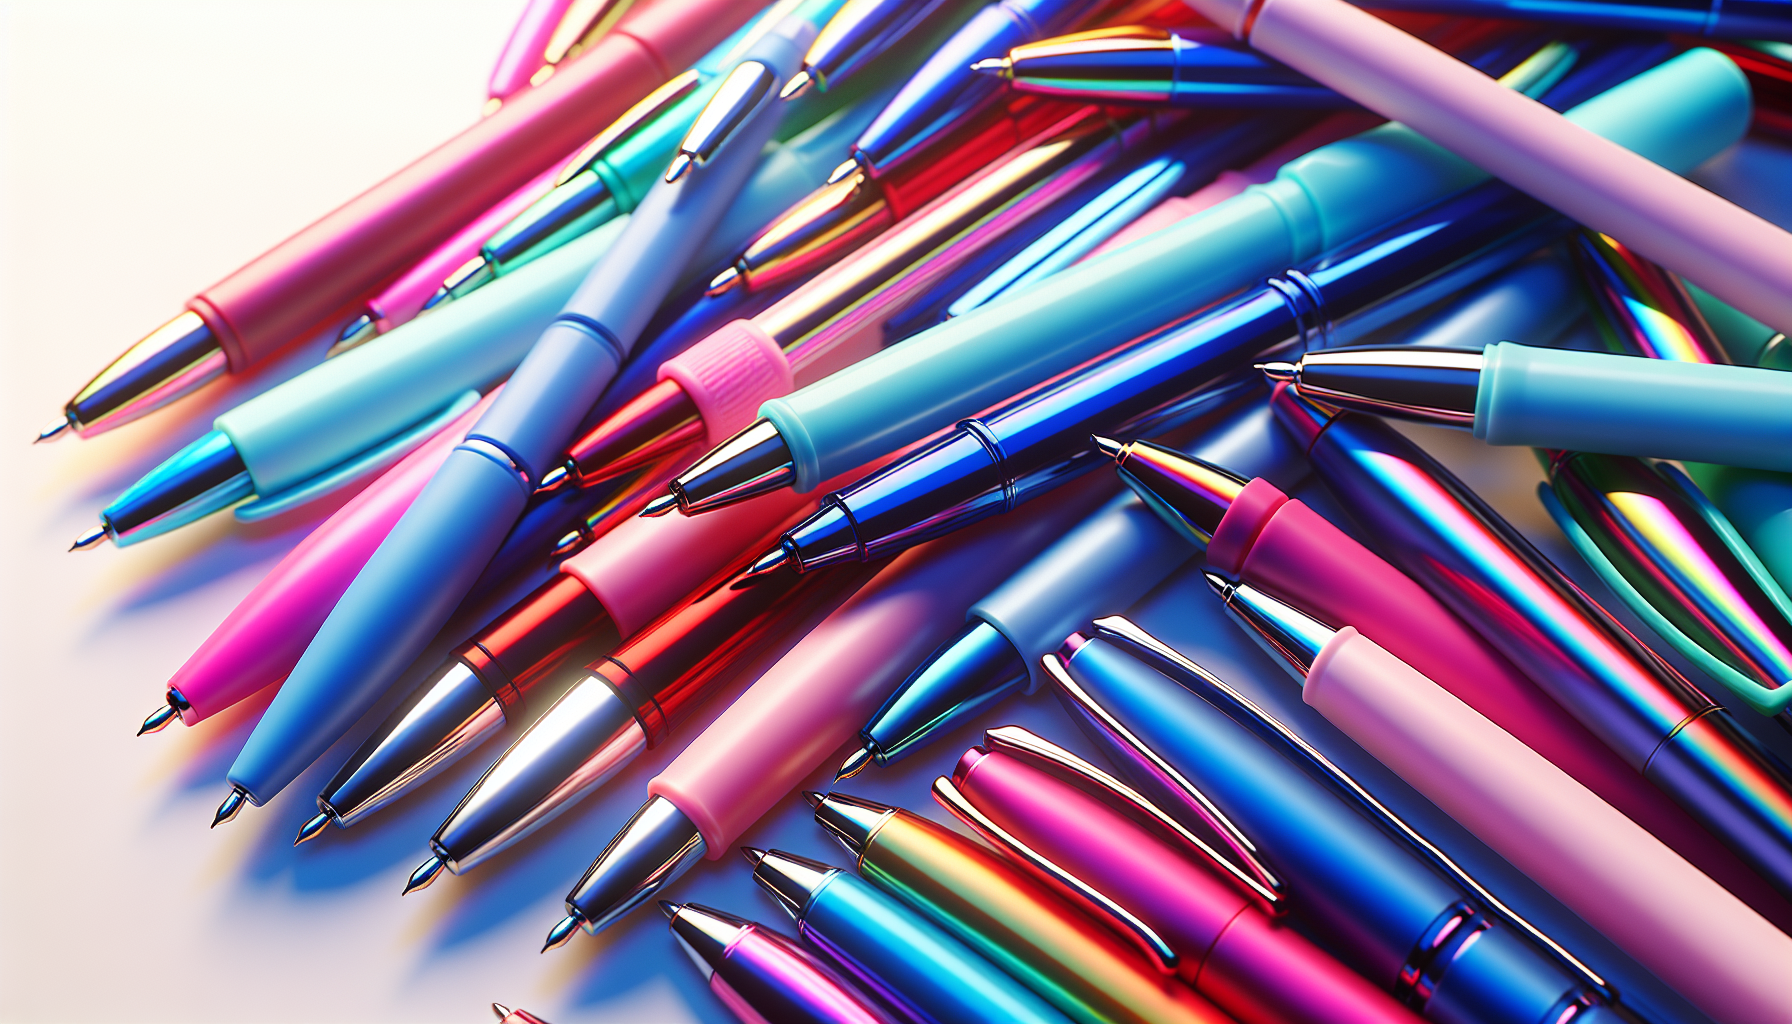 Colourful ballpoint pens in various shades